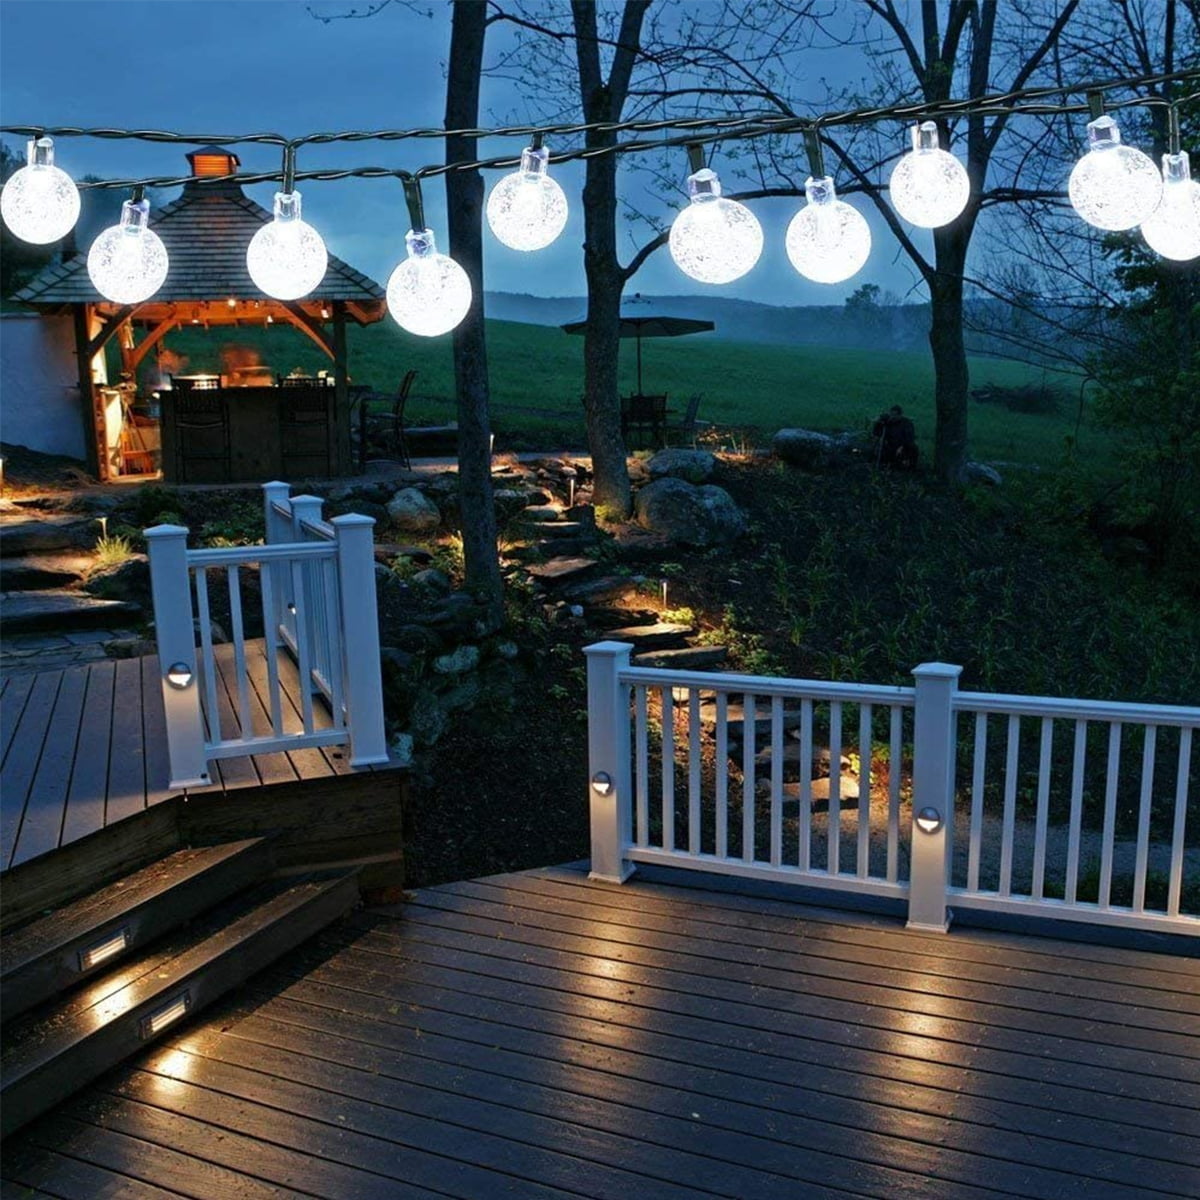 Details about   50 LED Solar String Lights Patio Party Yard Garden Wedding Waterproof Outdoor 